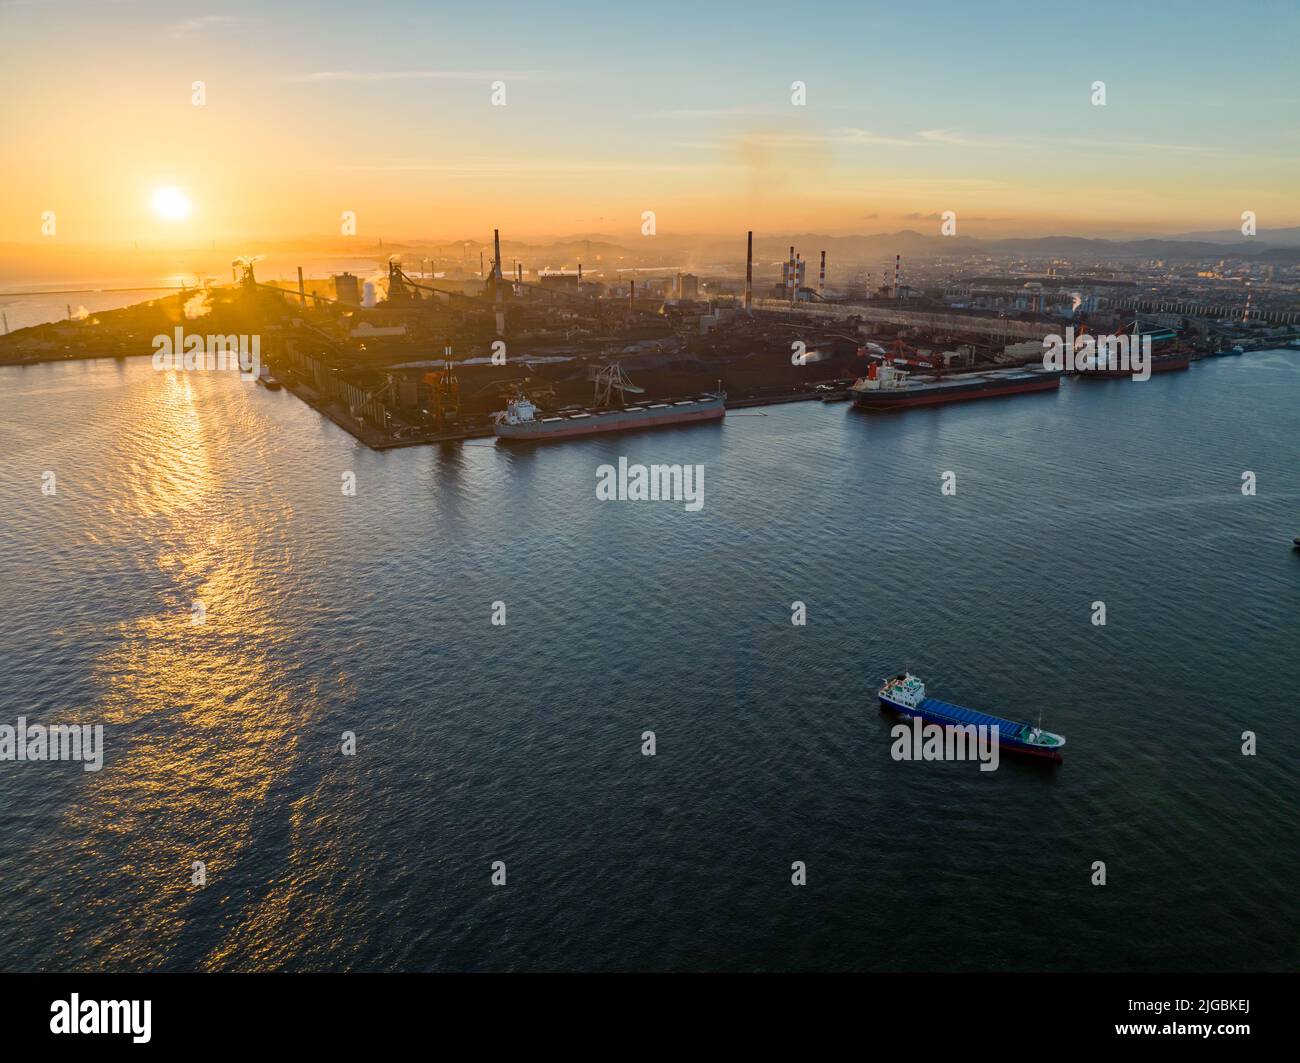 Cargo ships docked at large industrial facility with smokestacks at sunset Stock Photo